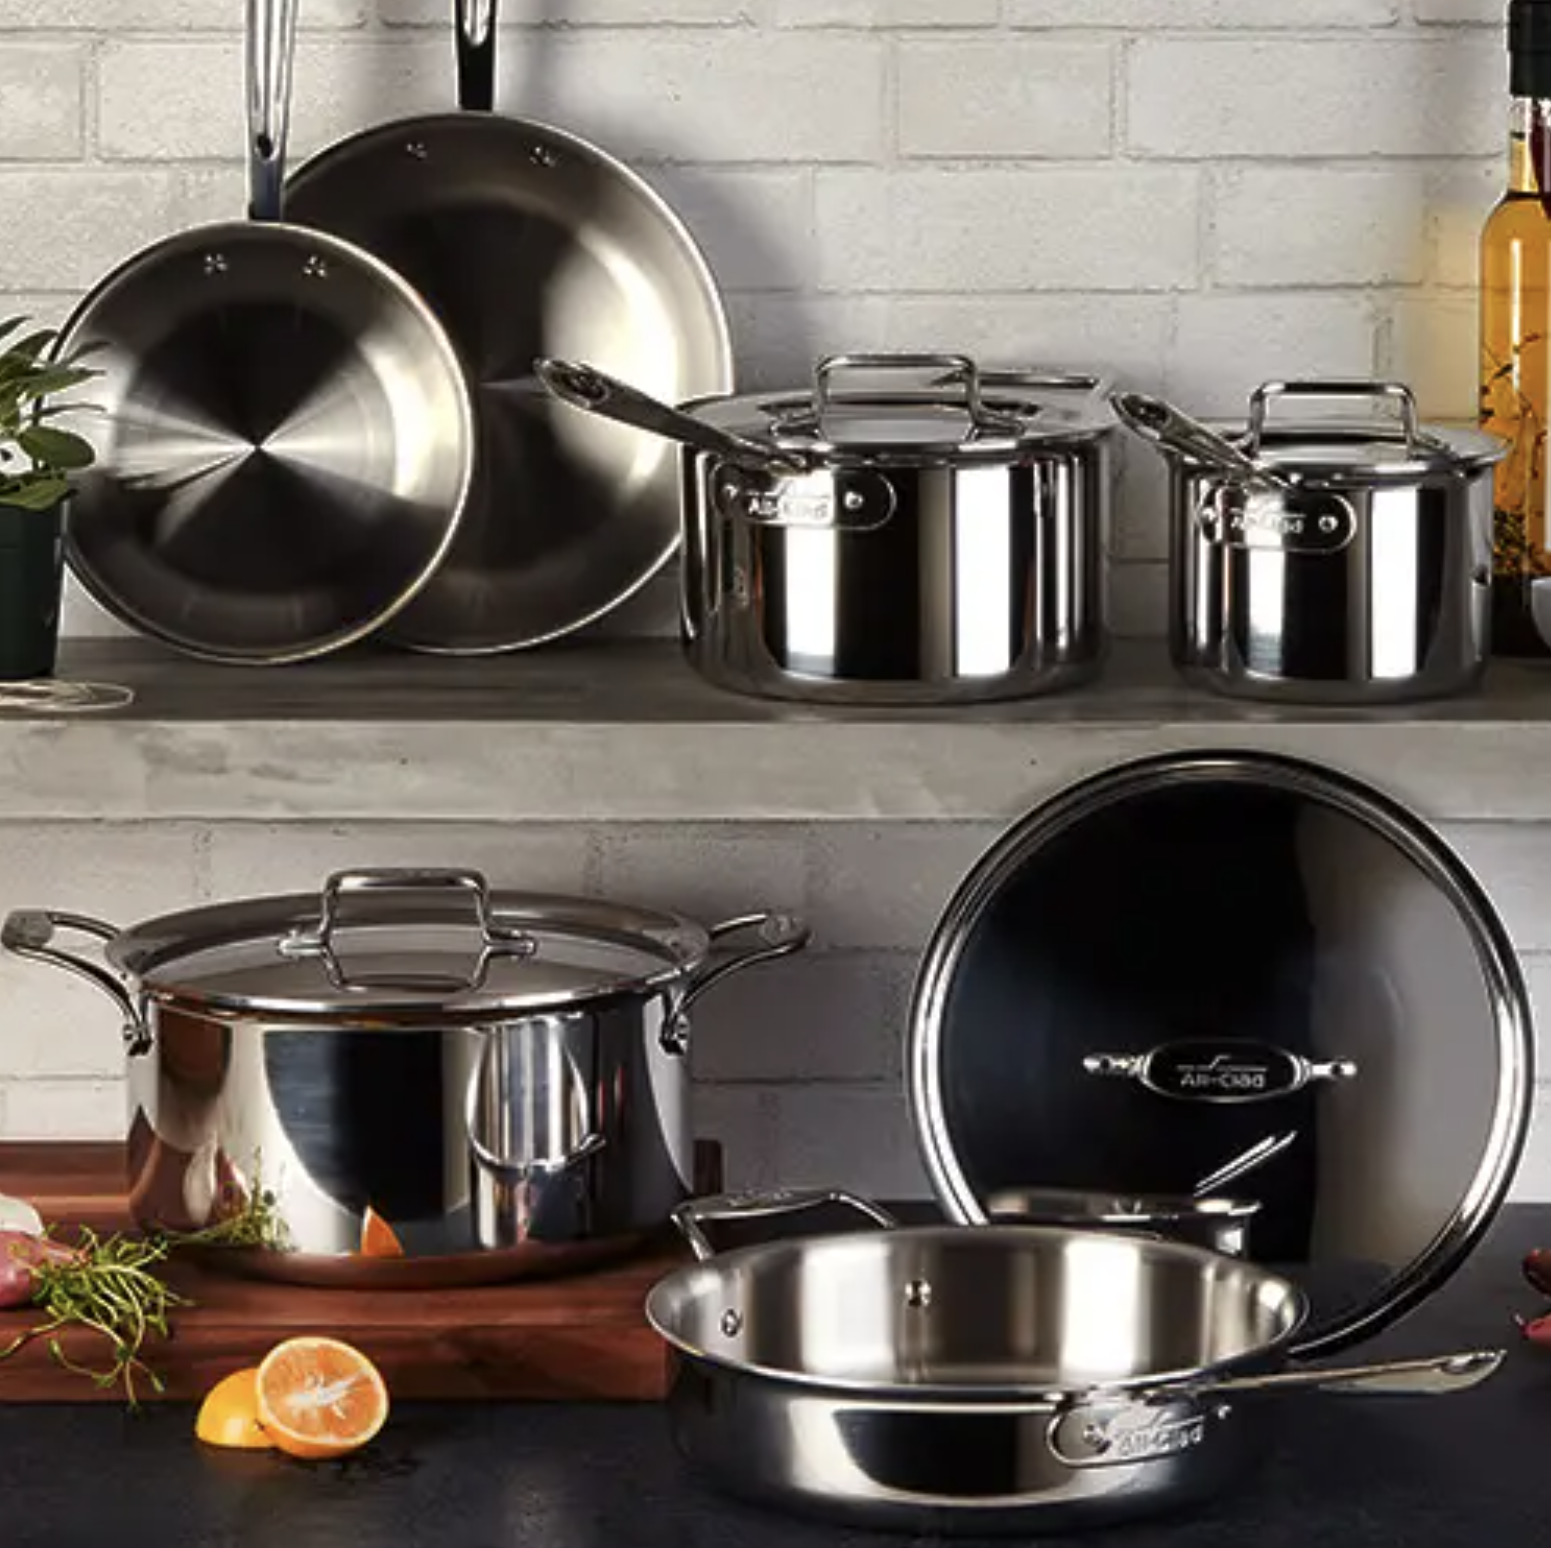 The Best Cookware Brands 2022 to Level Up Your Cooking